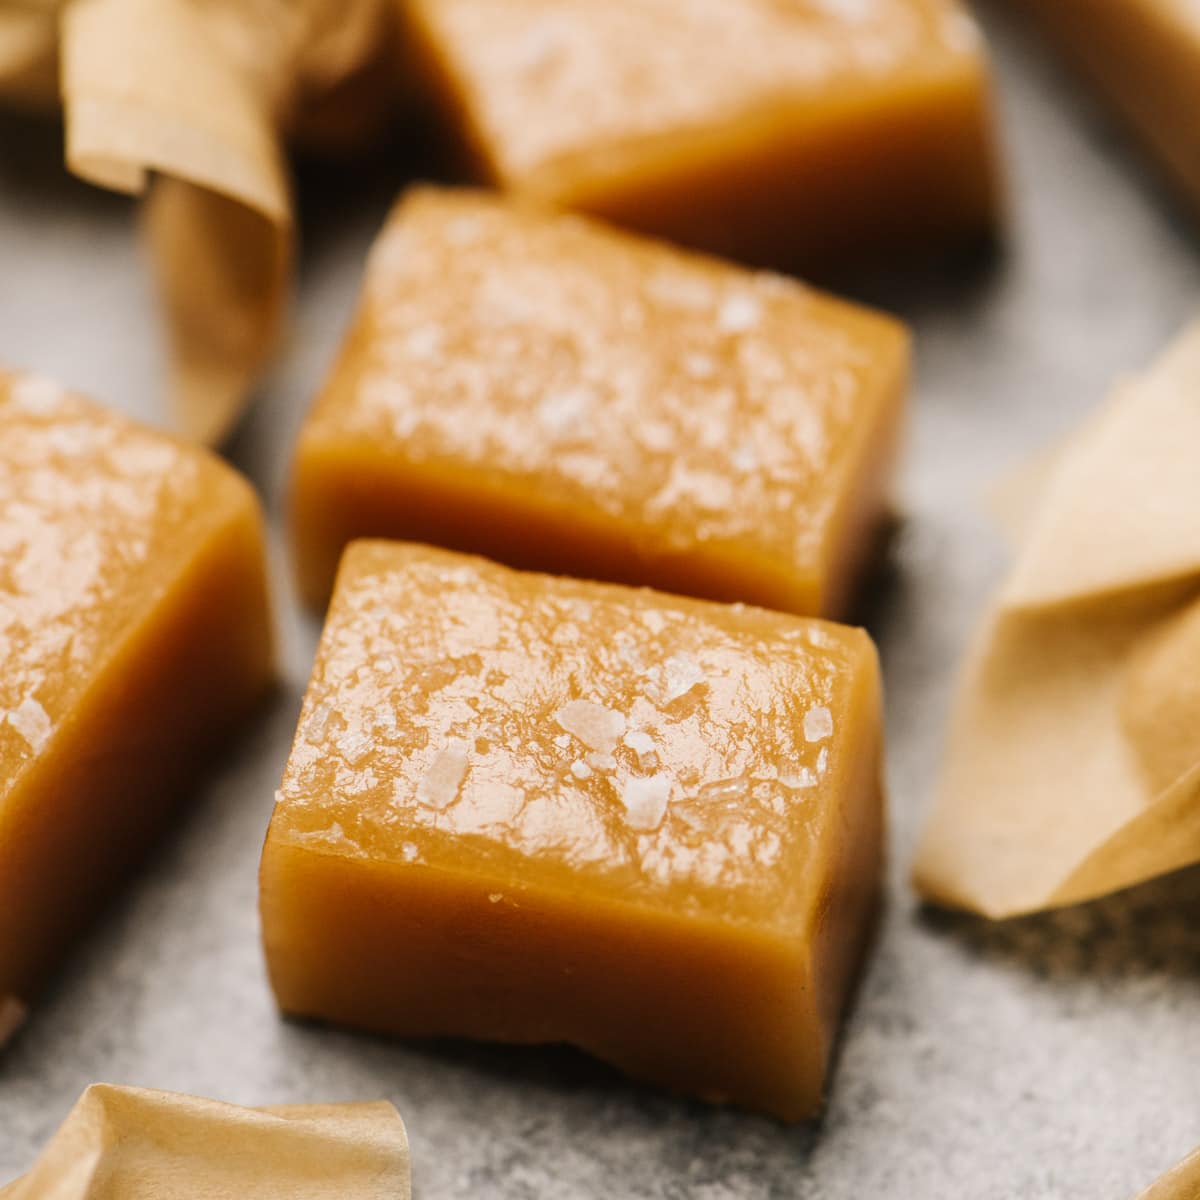 https://oursaltykitchen.com/wp-content/uploads/2017/12/caramel-candy-featured-image.jpg